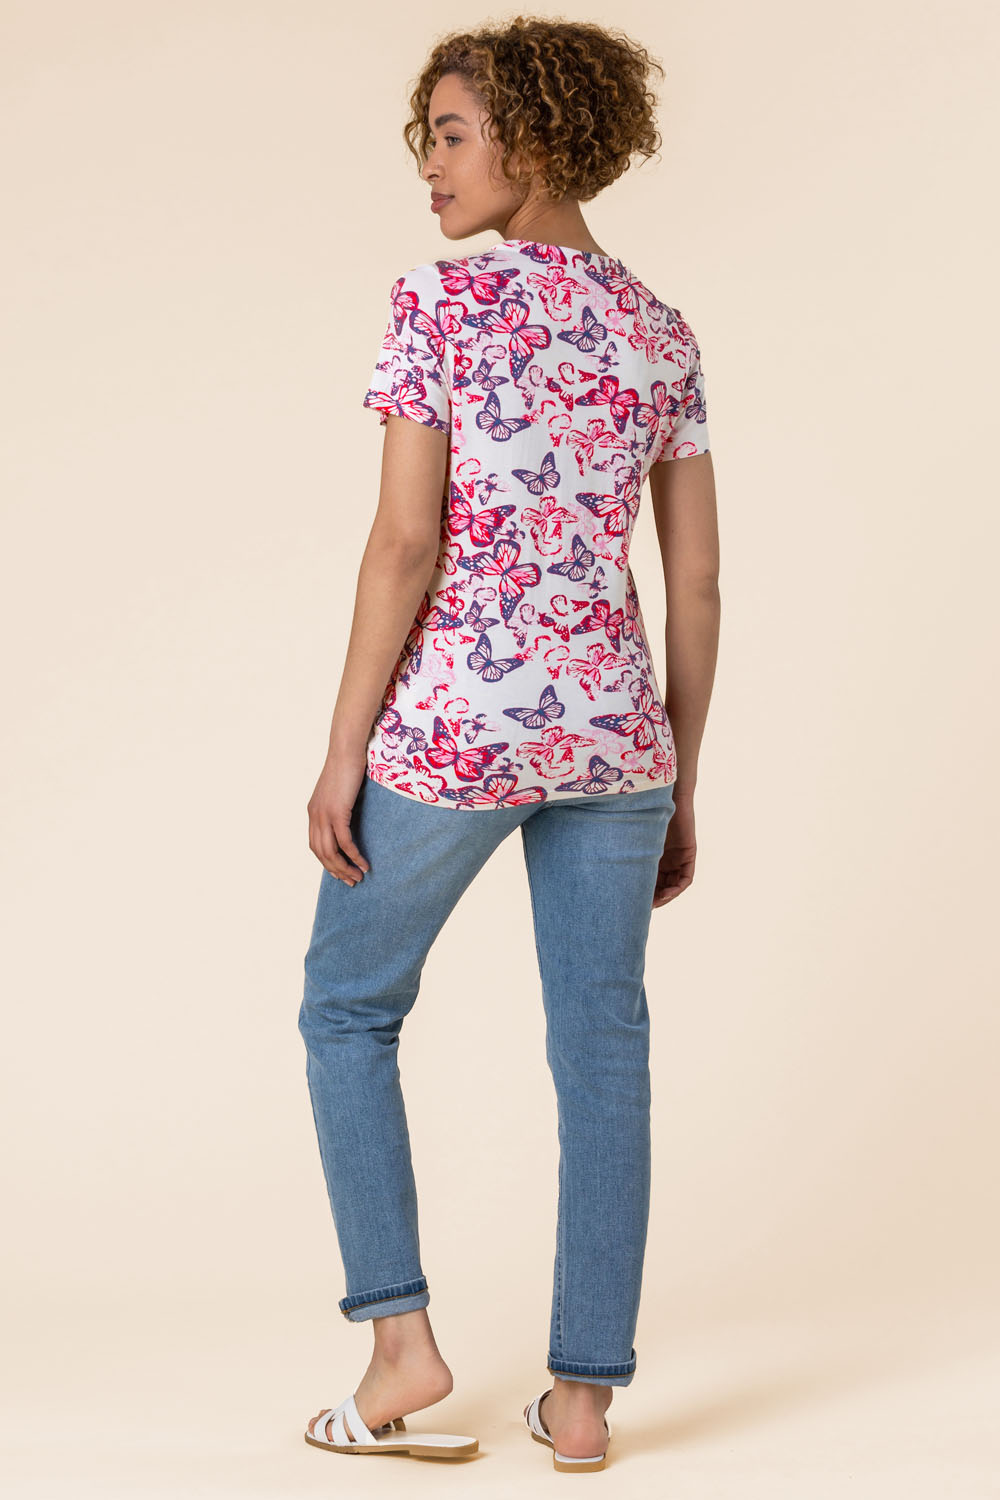 PINK Butterfly Print Button Top, Image 2 of 5